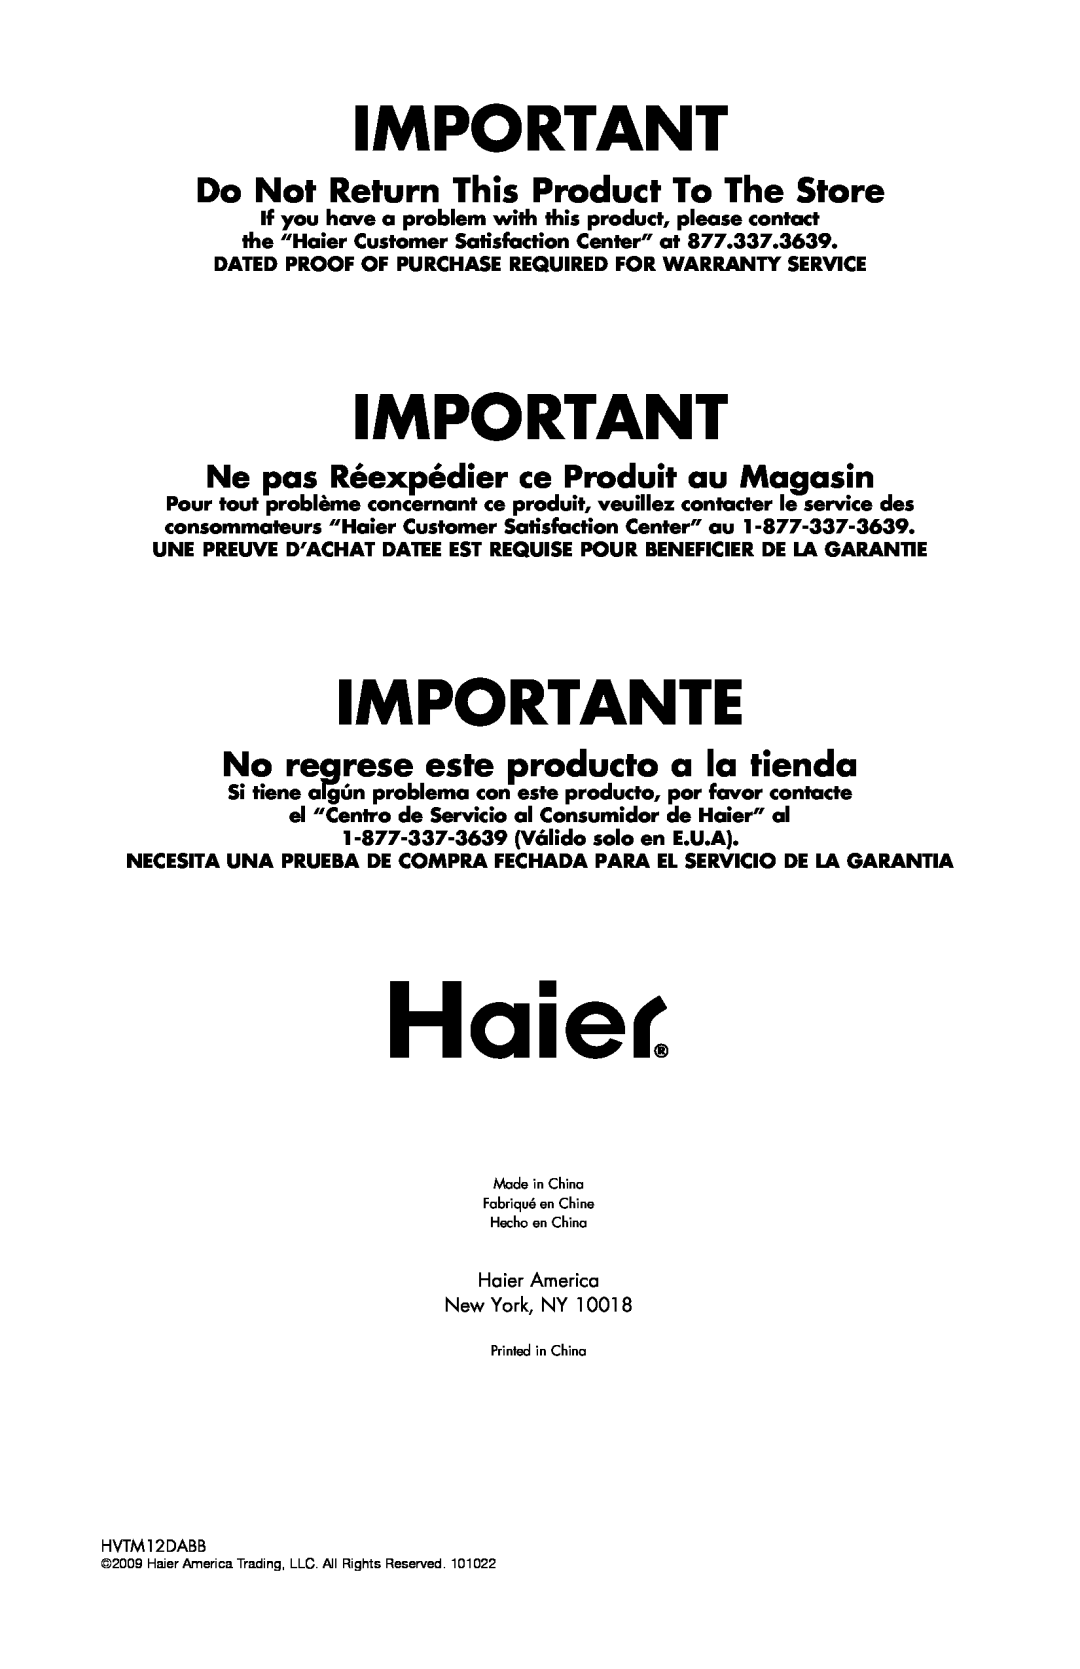 Haier HVTM12DABB user manual Importante, Do Not Return This Product To The Store, No regrese este producto a la tienda 